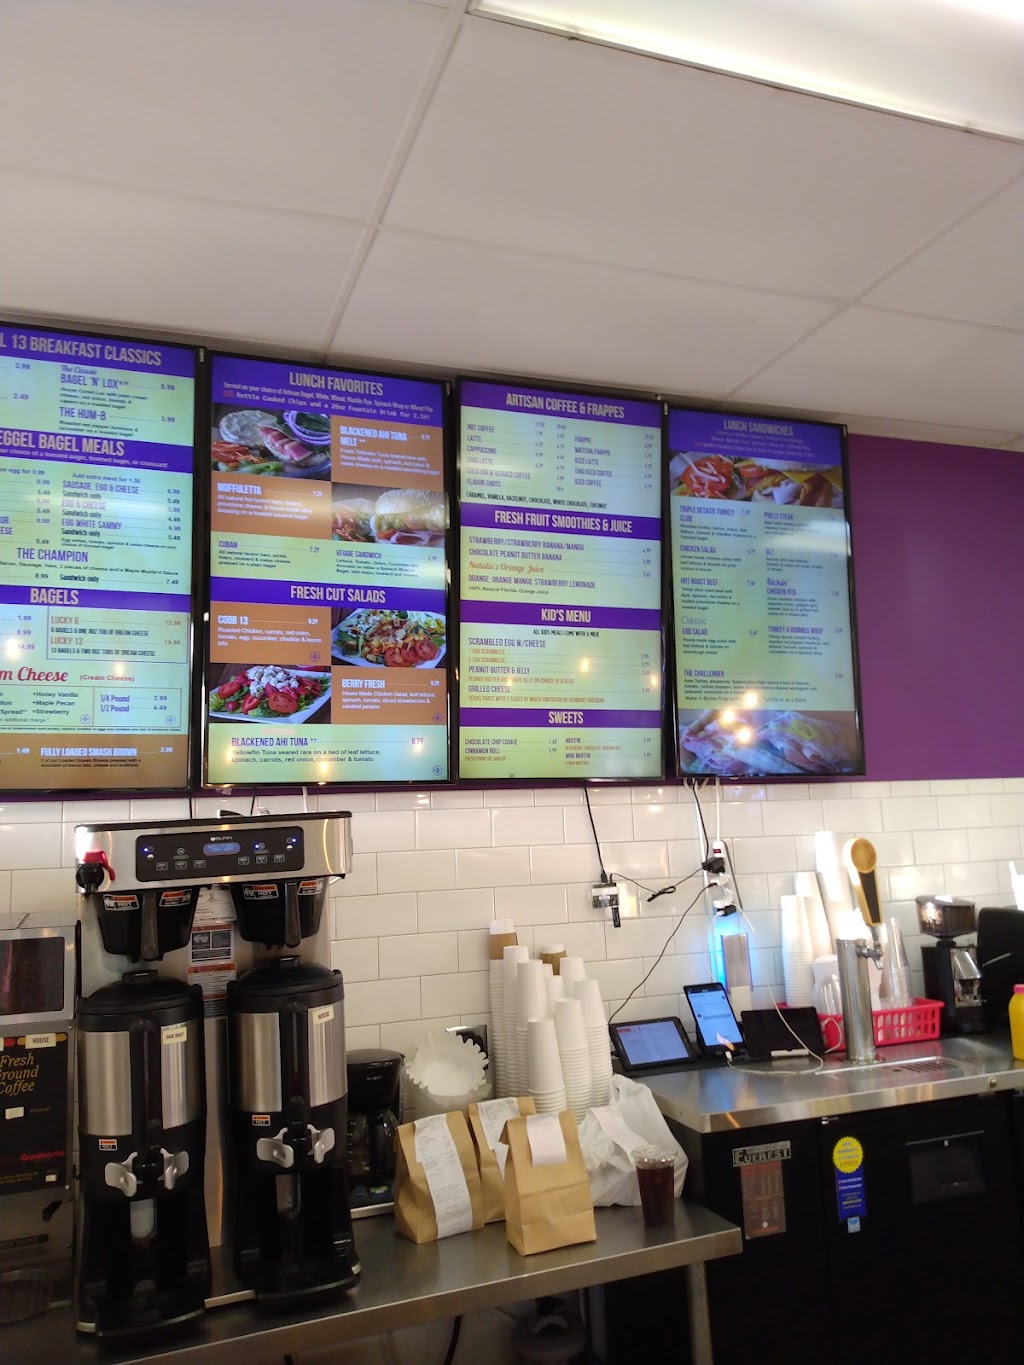 Bagel 13 | 3776 S Hopkins Ave Suite A, Titusville, FL 32780, USA | Phone: (321) 225-8685